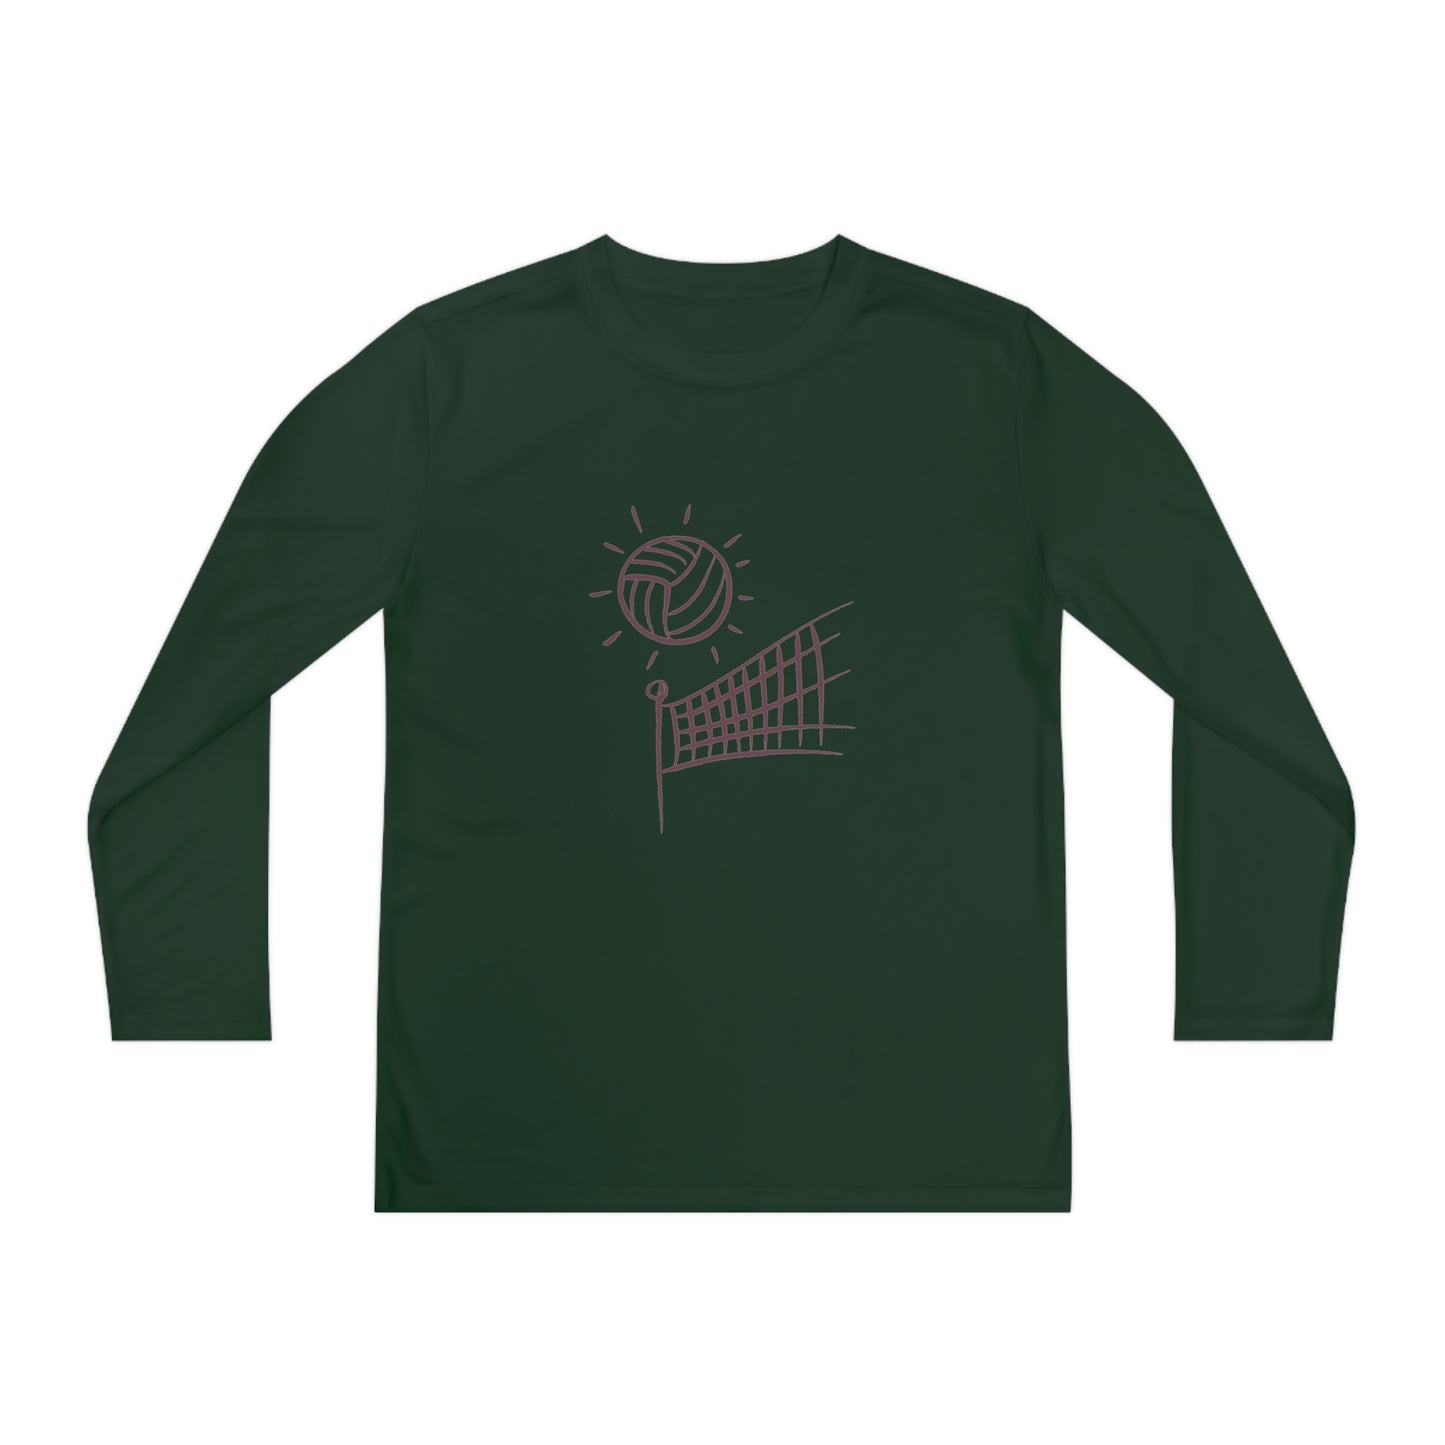 Youth Long Sleeve Competitor Tee: Volleyball